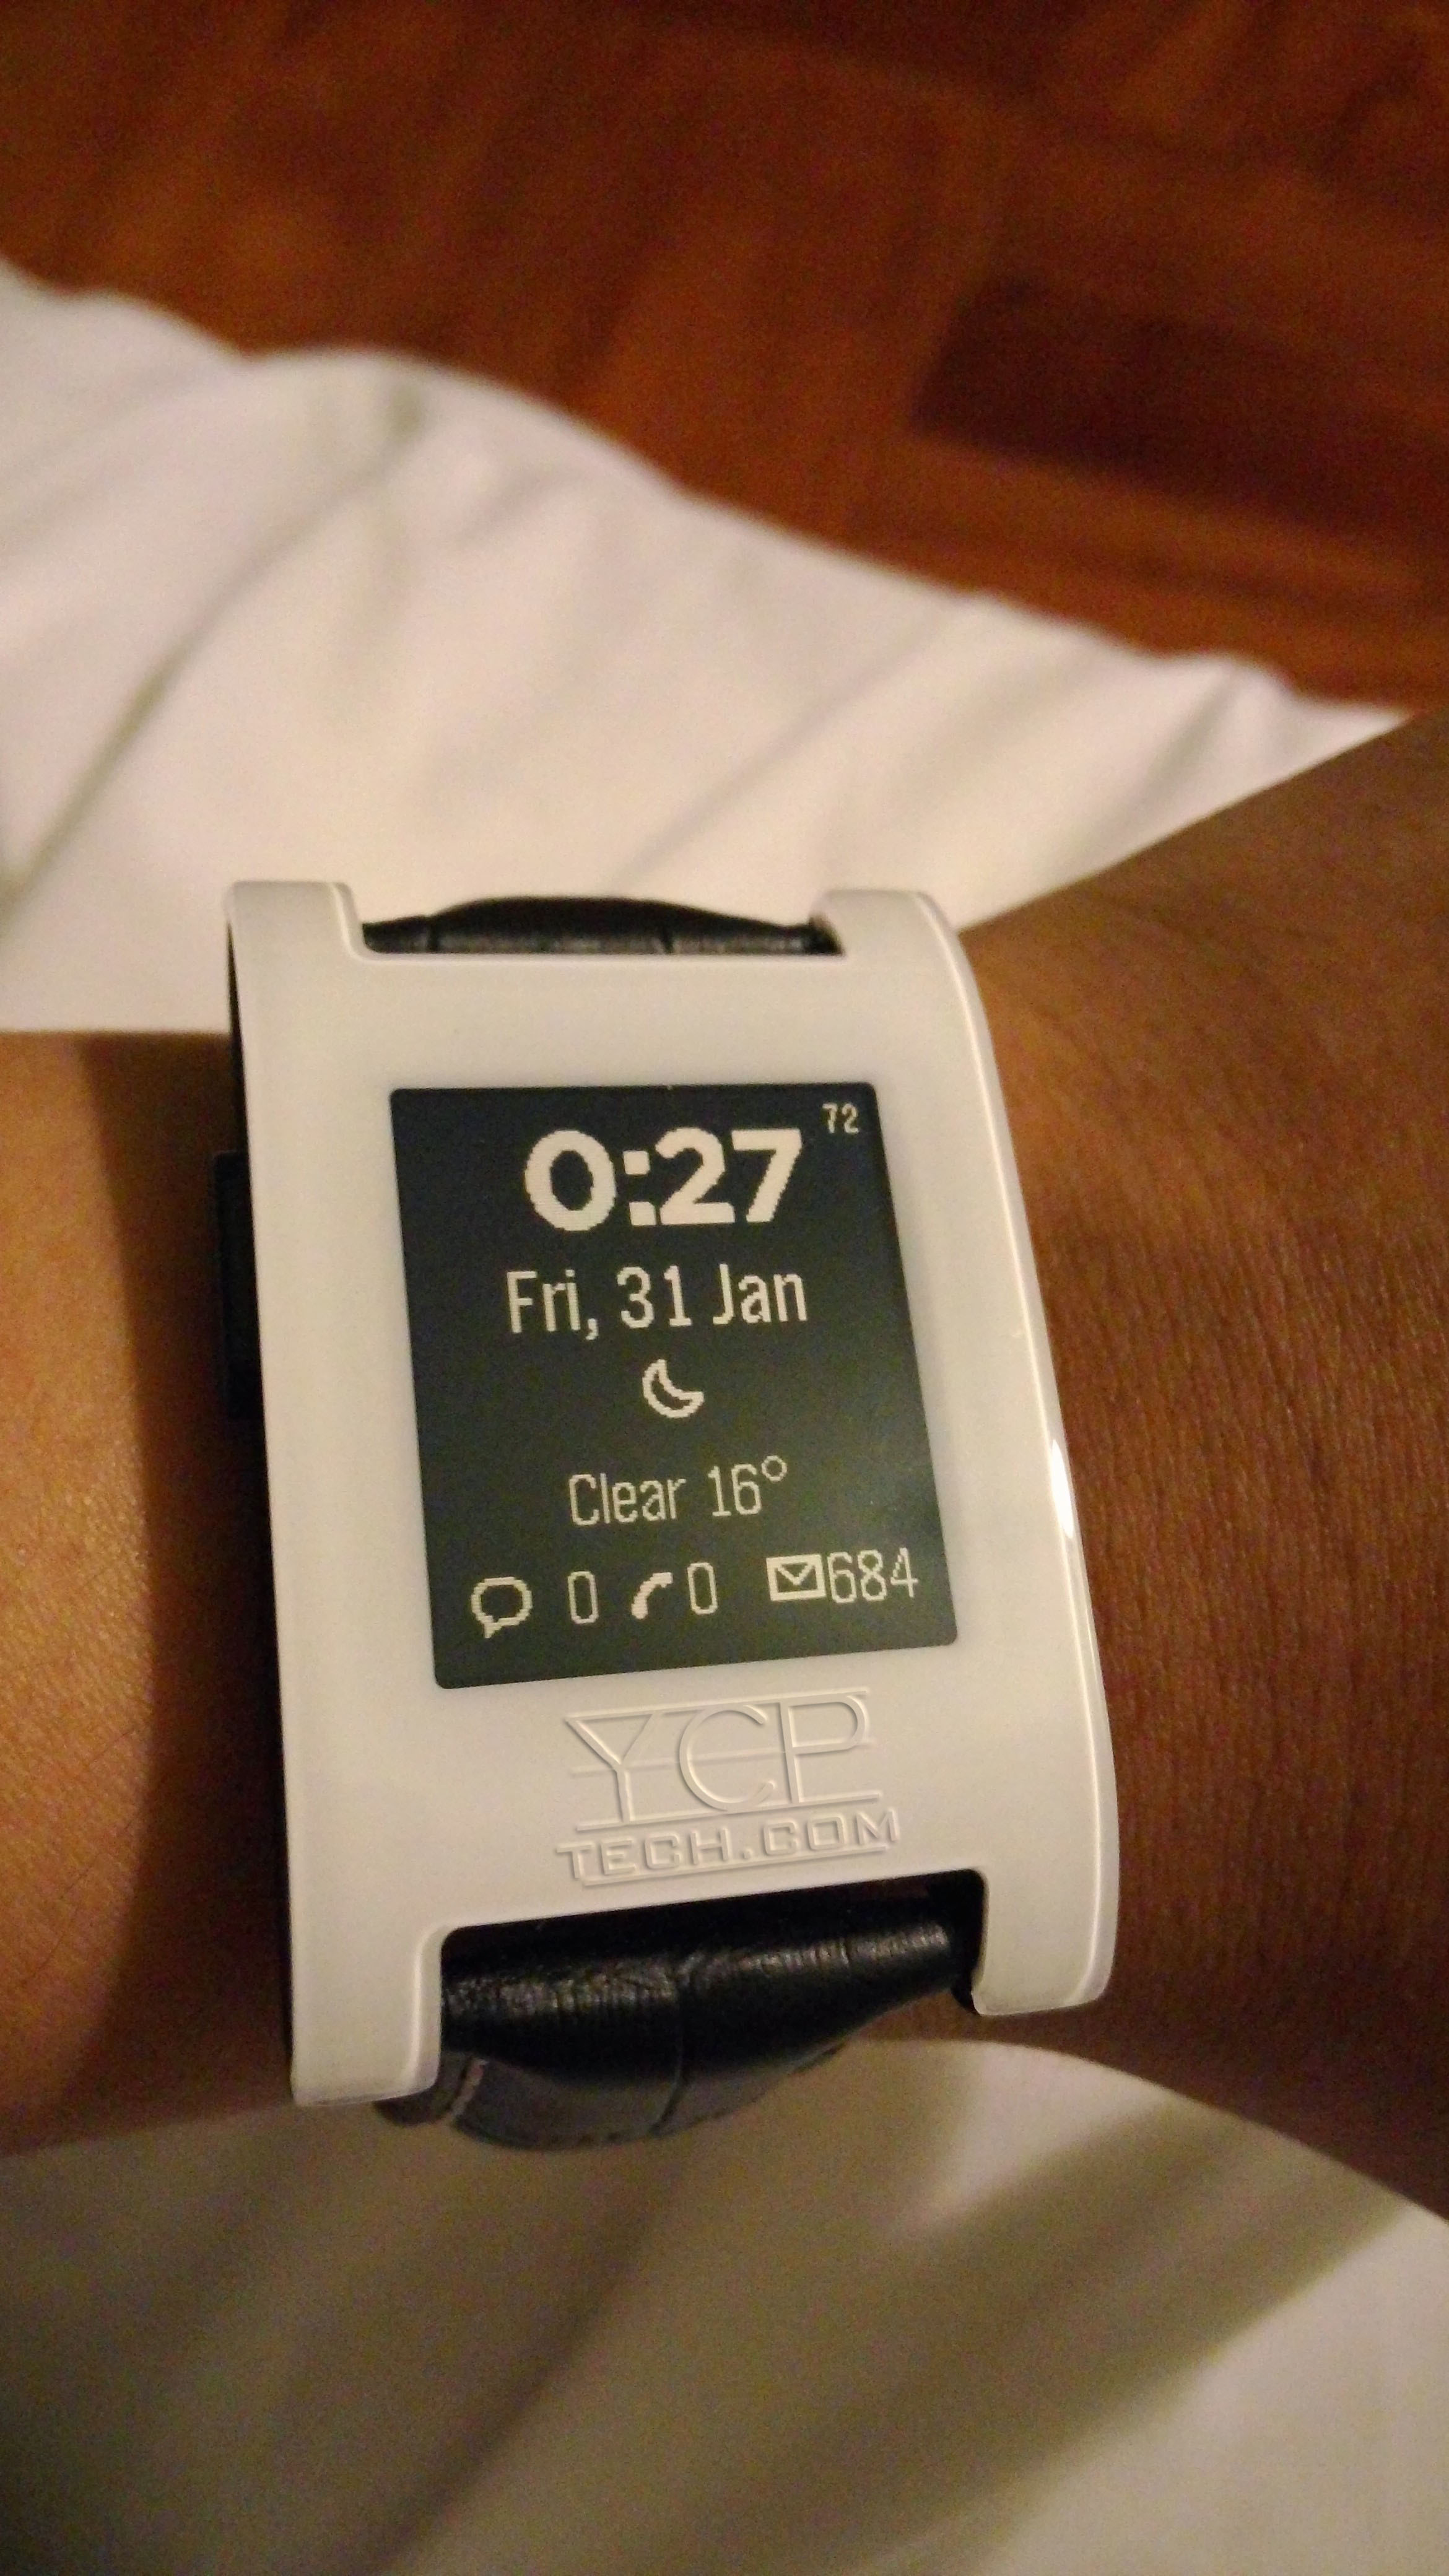 ycp pebble review 3rd party apps